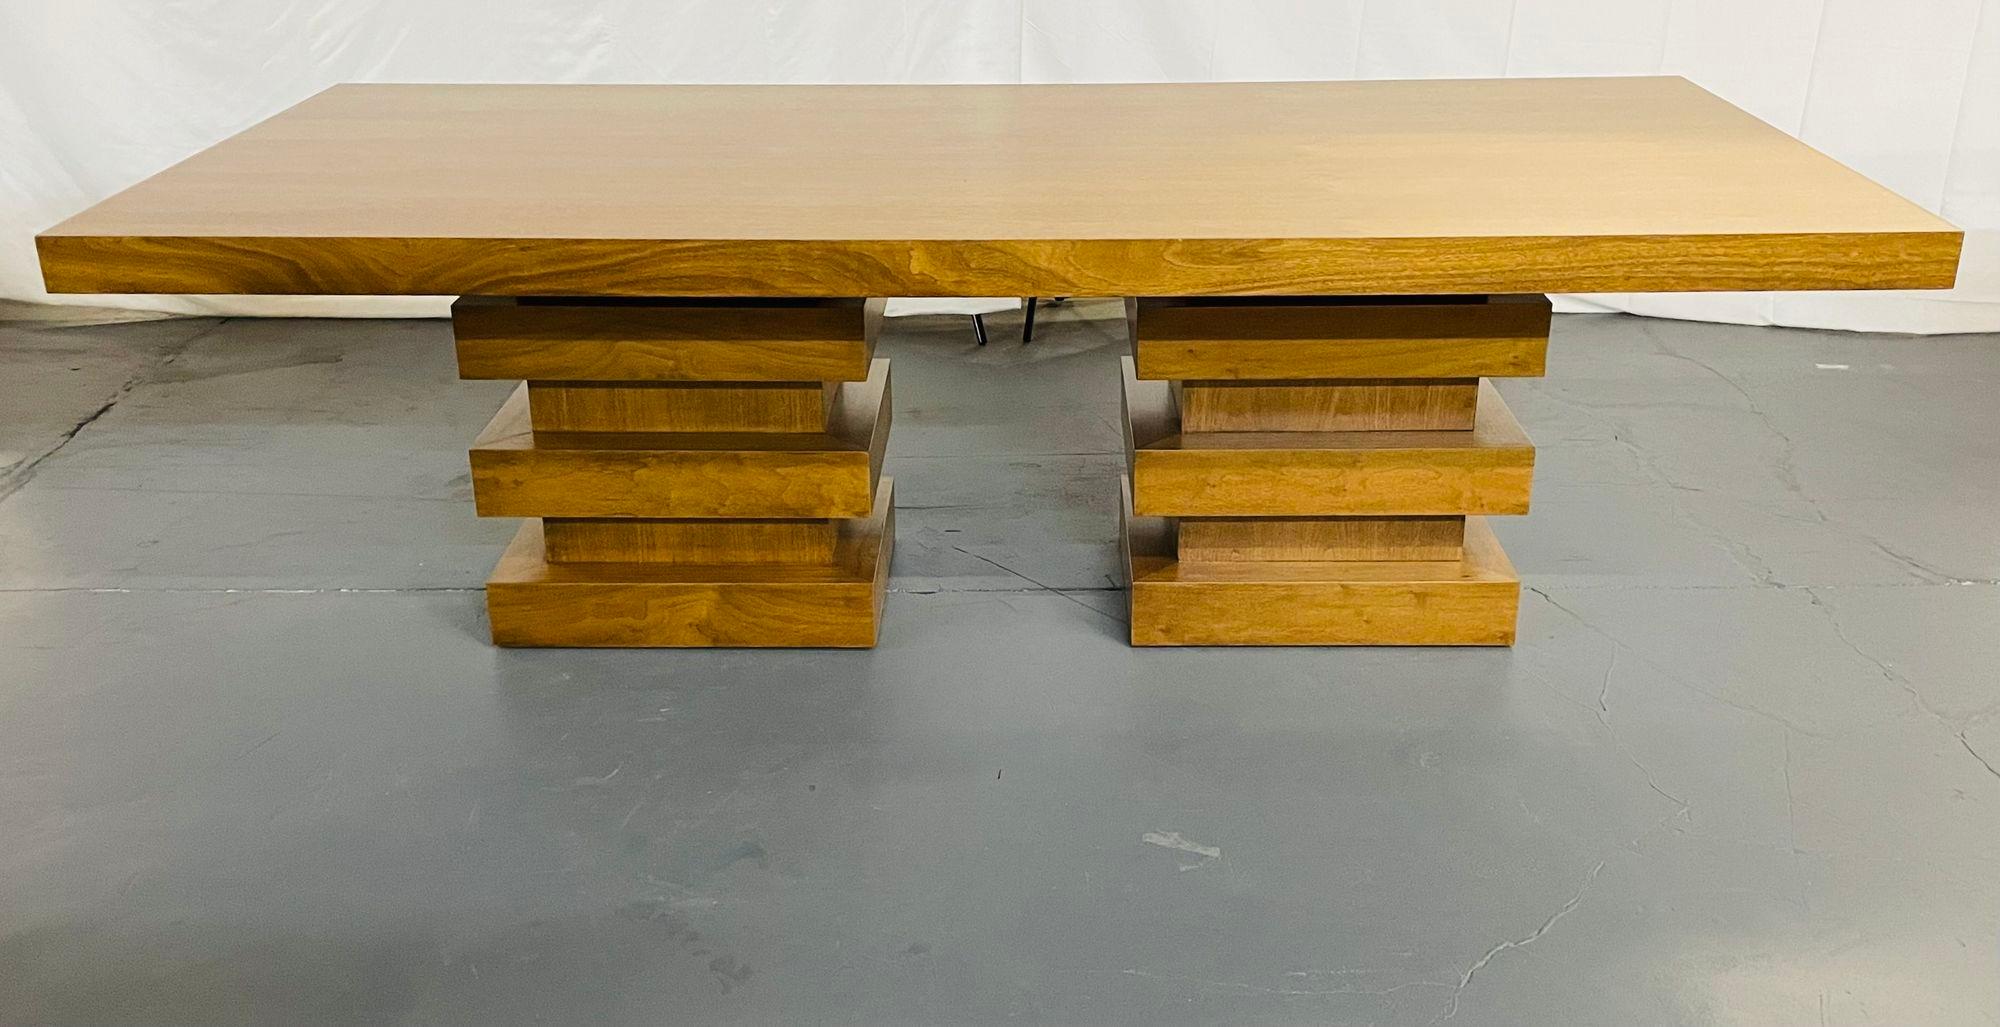 Modern Oak double pedestal base dining / conference table, geometric design 

A solid oak slab table top sitting on solid oak geometric stacked double pedestal bases. This table is very modern in form with a beautiful light shade of brown. The